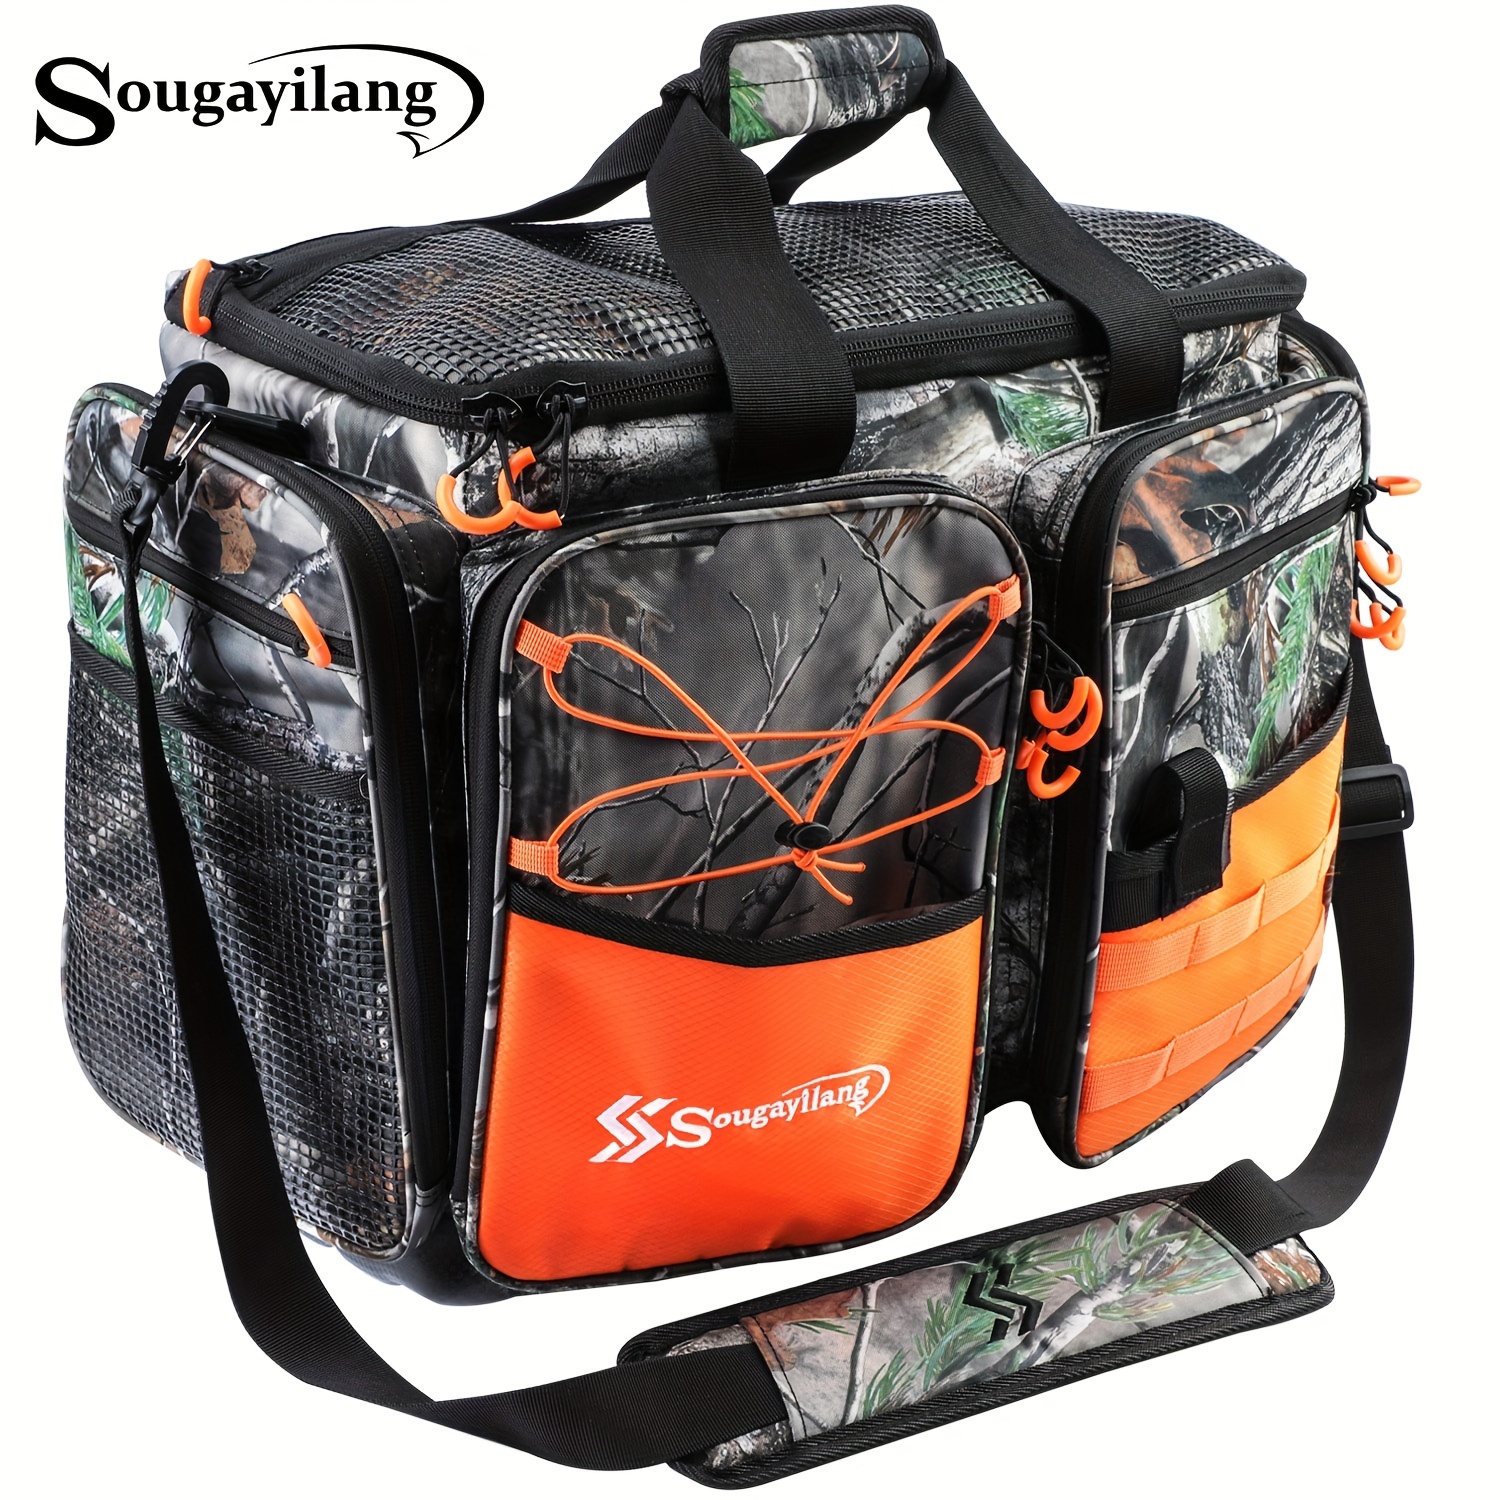 Organize Your Fishing Gear with this Water-Resistant Sougayilang Tackle Bag  - Portable and Durable!